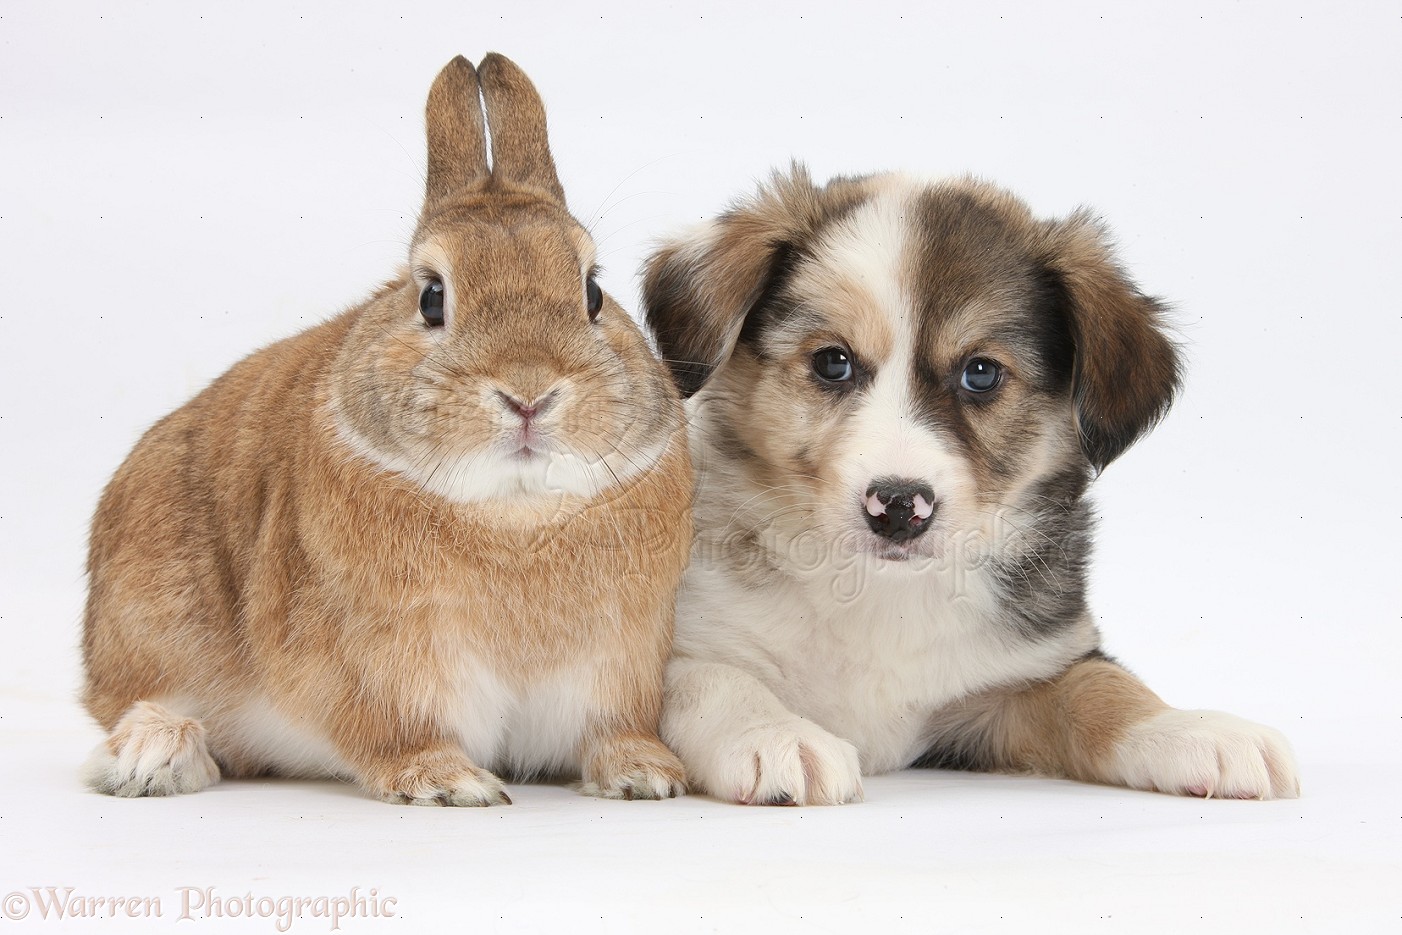  - 31968-Border-Collie-pup-and-Sandy-rabbit-white-background